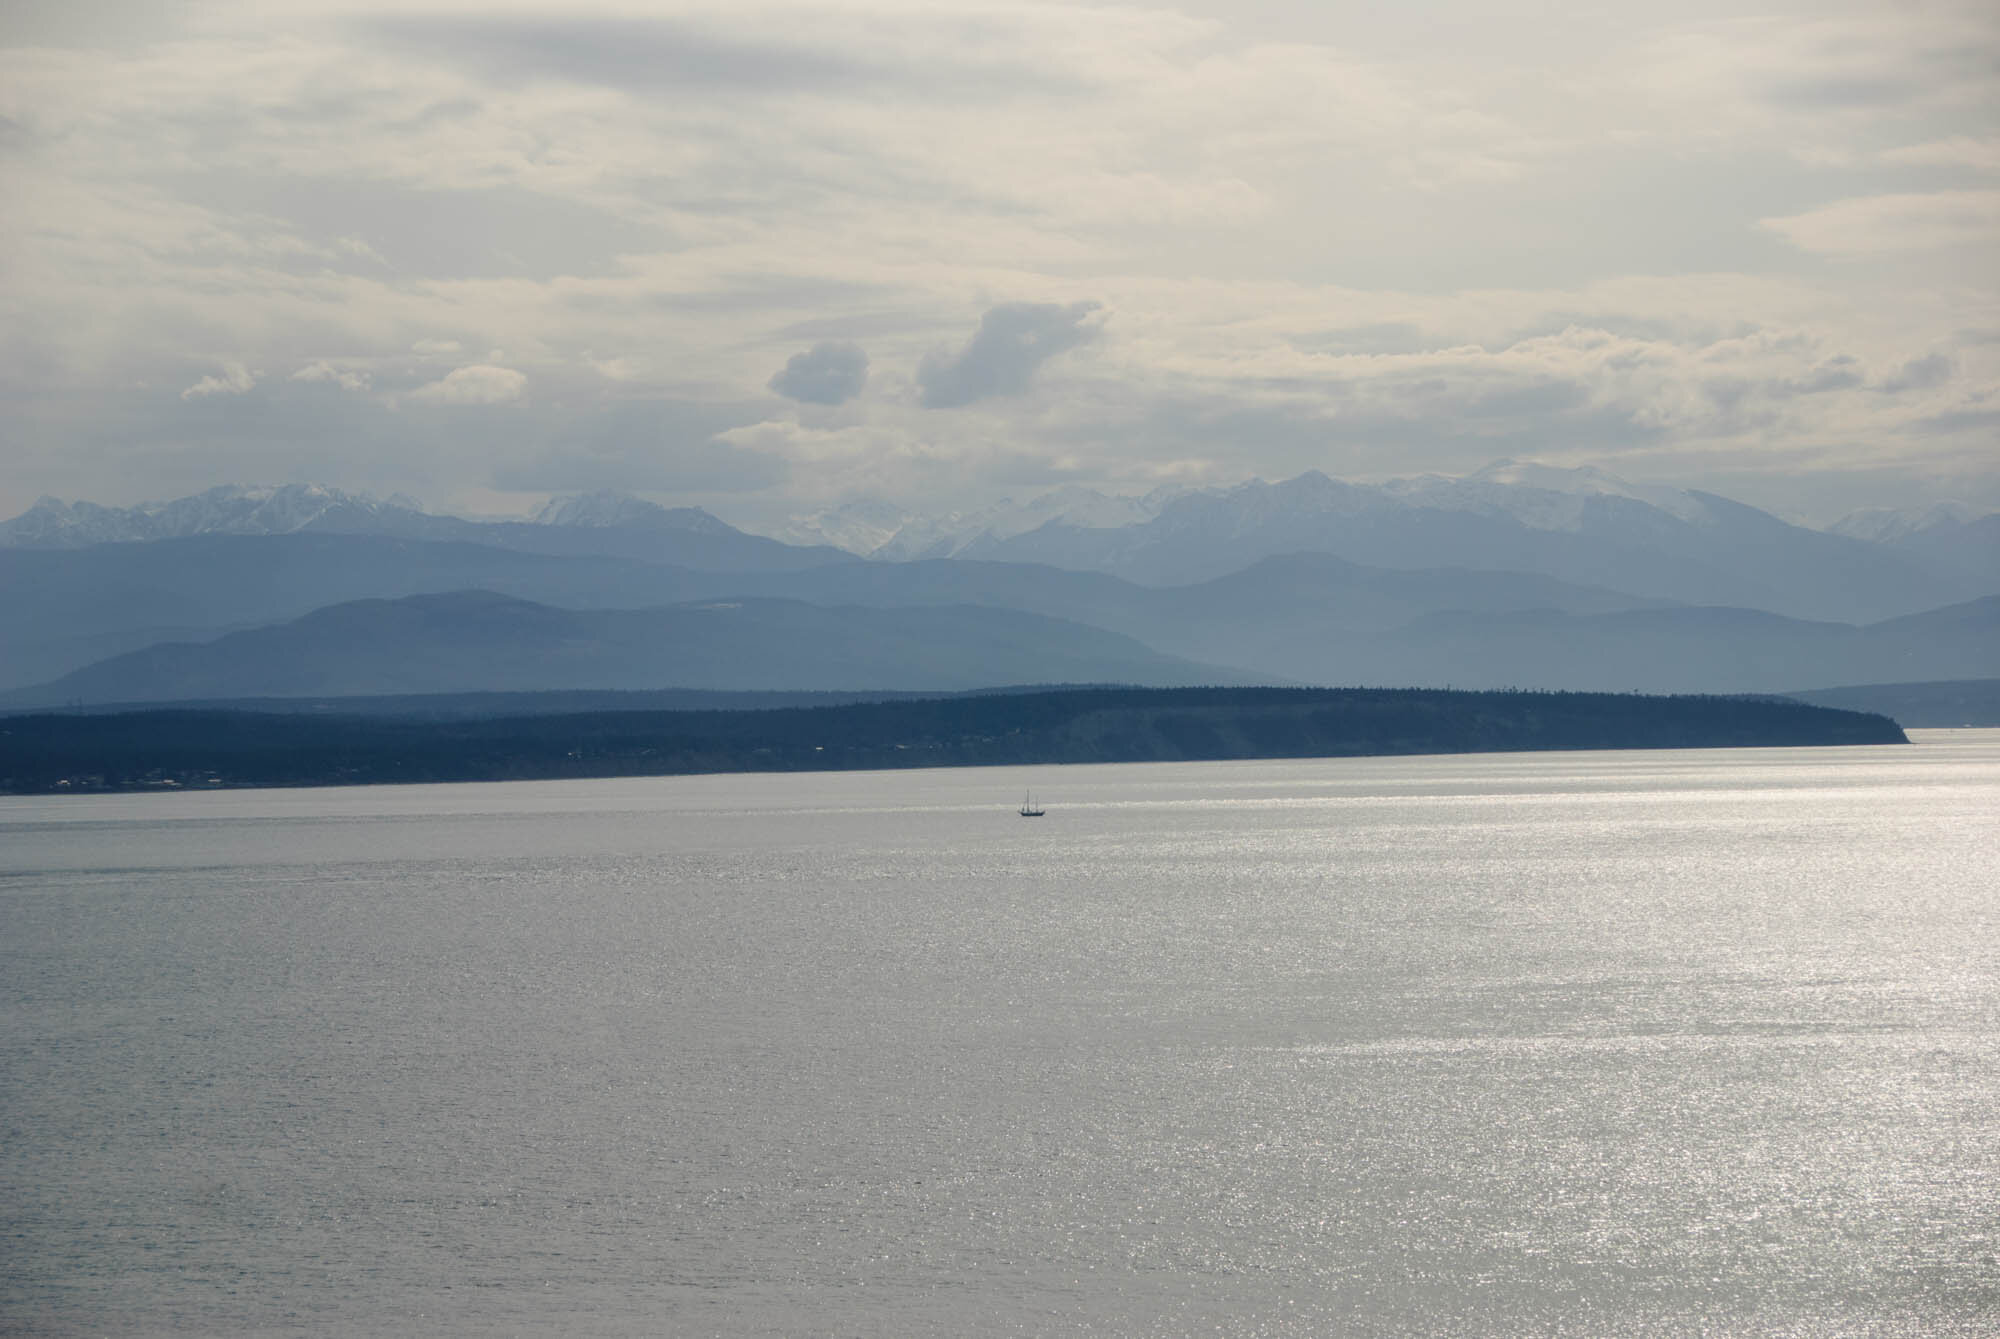 Olympic Range and small boat